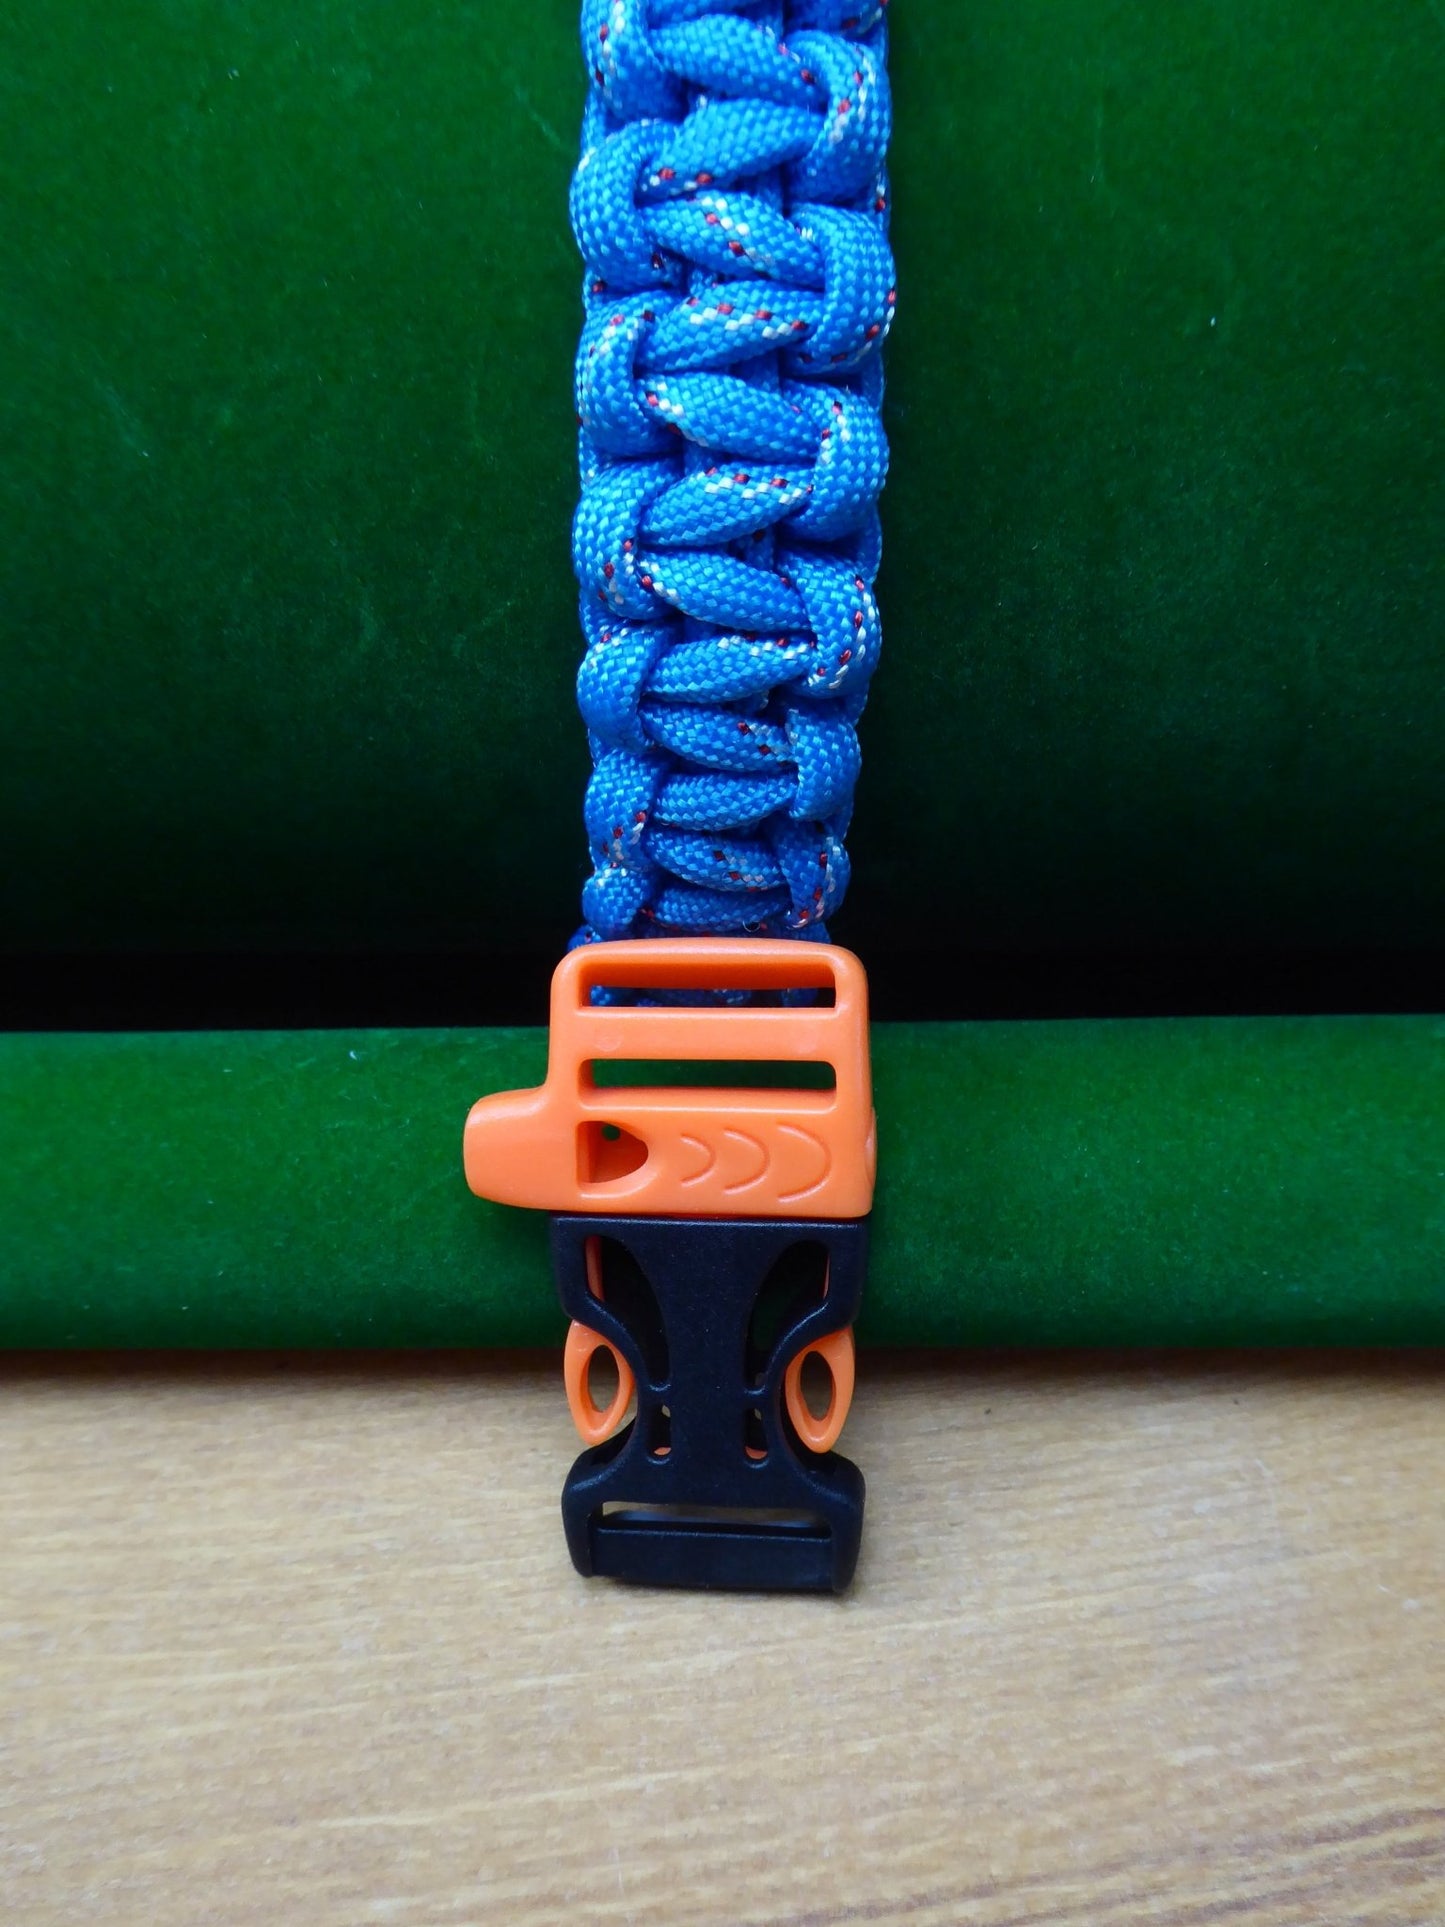 Paracord Buckle Bracelet kits with choice of colours Paracord Huggins Attic Blue with Black & White Dashes Black & Orange plastic whistle Buckle  [Huggins attic]